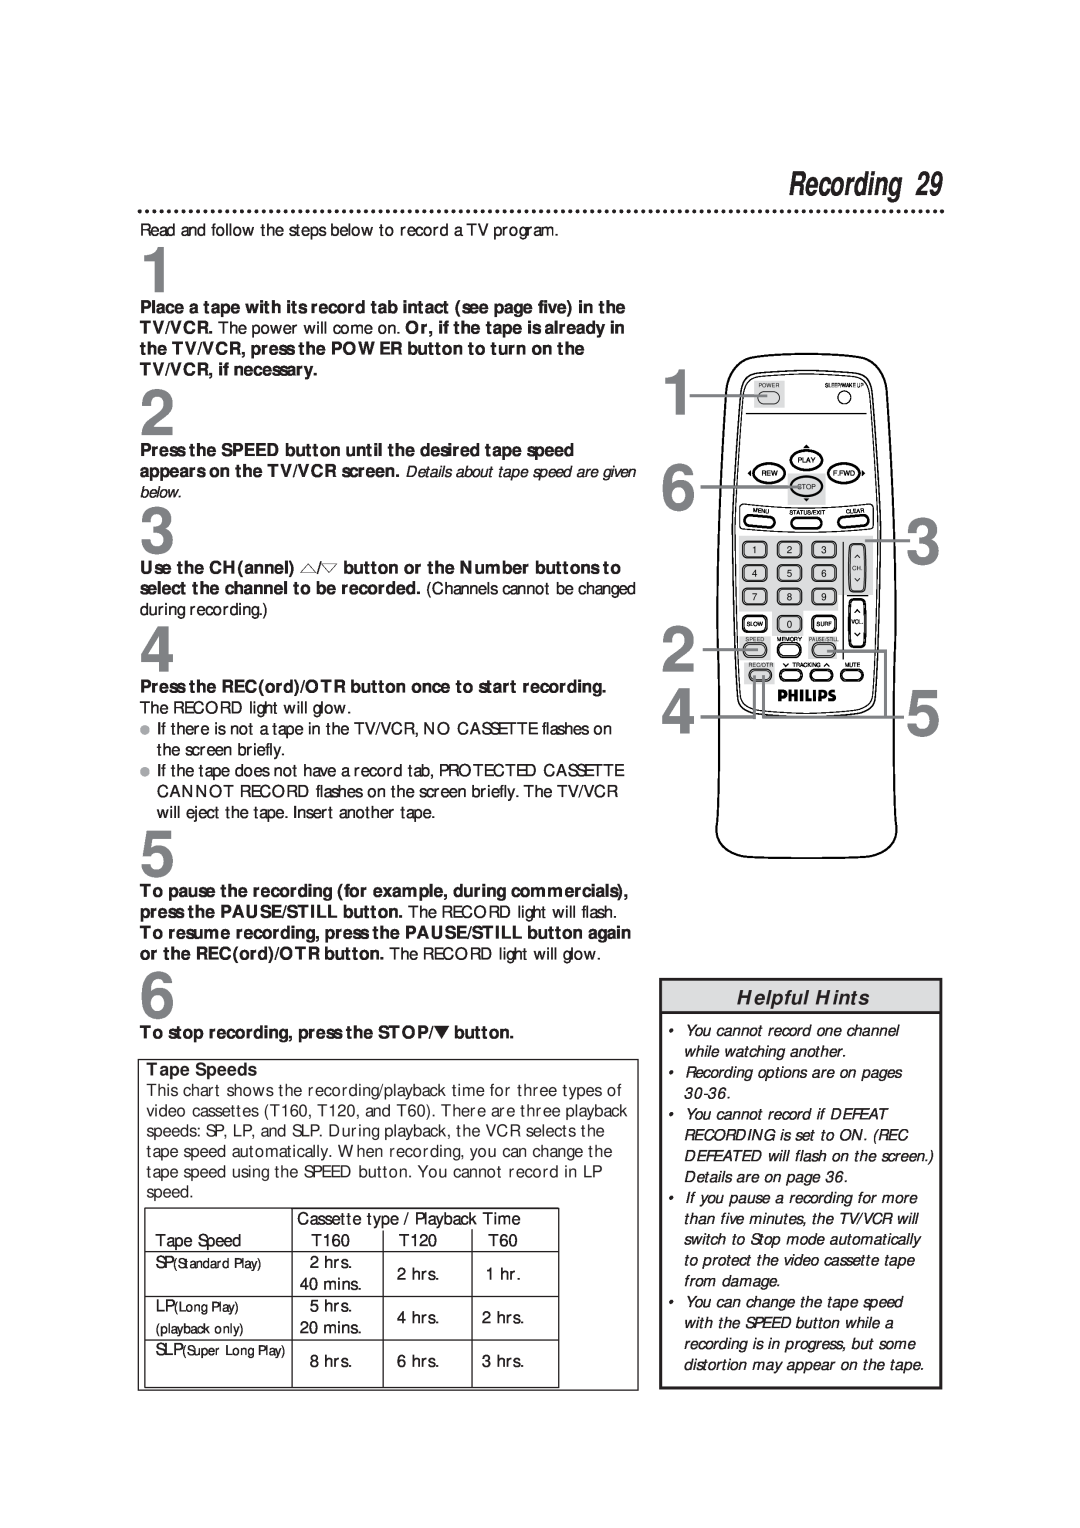 Magnavox CCB193AT owner manual Helpful Hints, Recording options are on pages, distortion may appear on the tape 